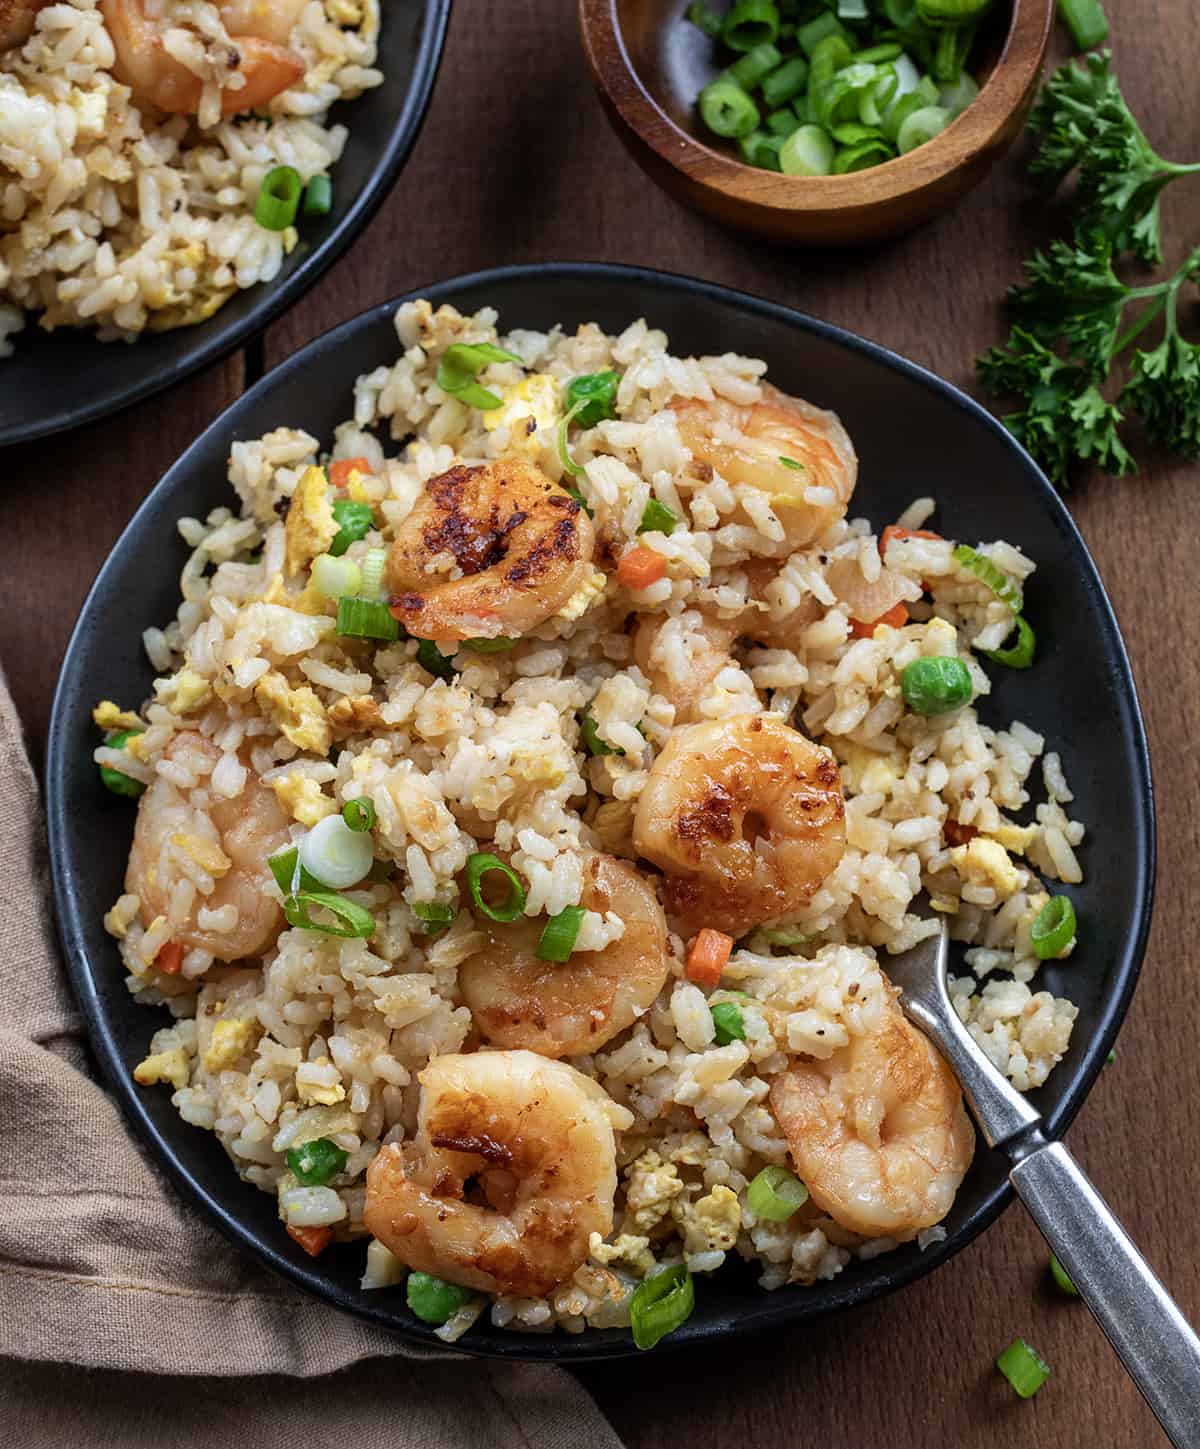 Plates of Shrimp Fried Rice on a wooden table with a fork.